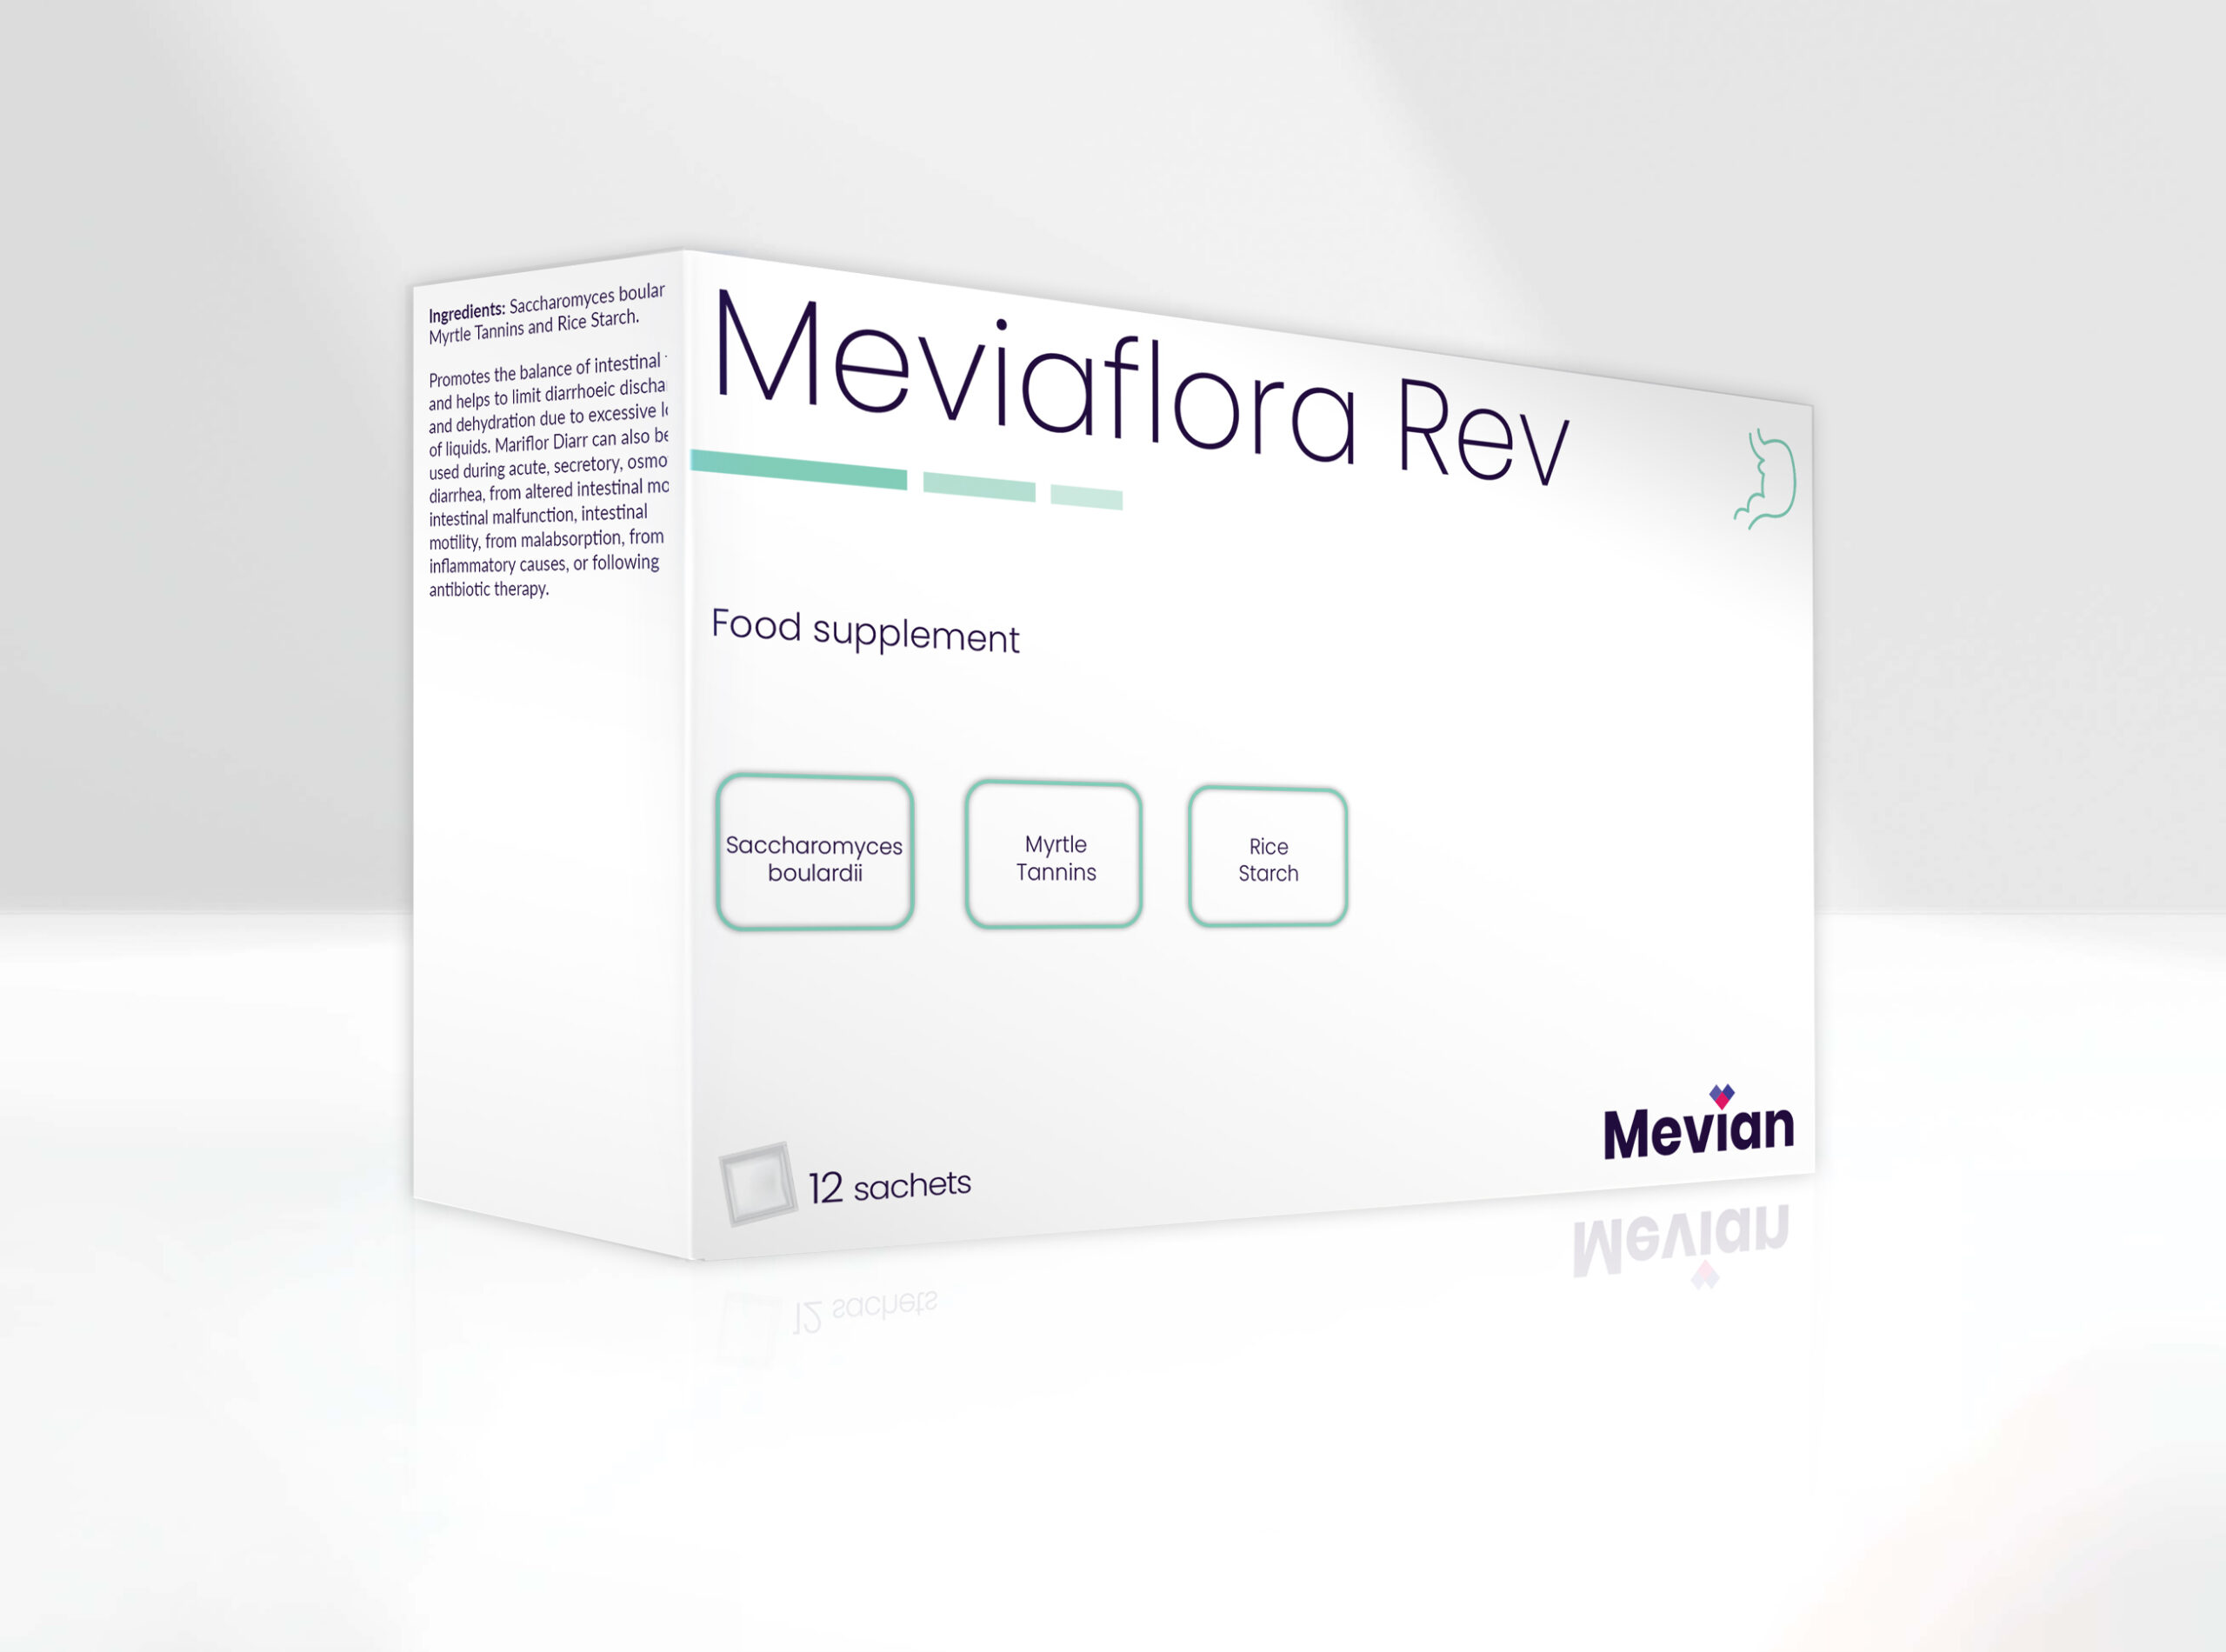 Meviaflora Rev promotes the balance of intestinal flora and helps to limit diarrhoeic discharges and dehydration due to excessive loss of liquids, like acute and/or recurrent diarrhea.